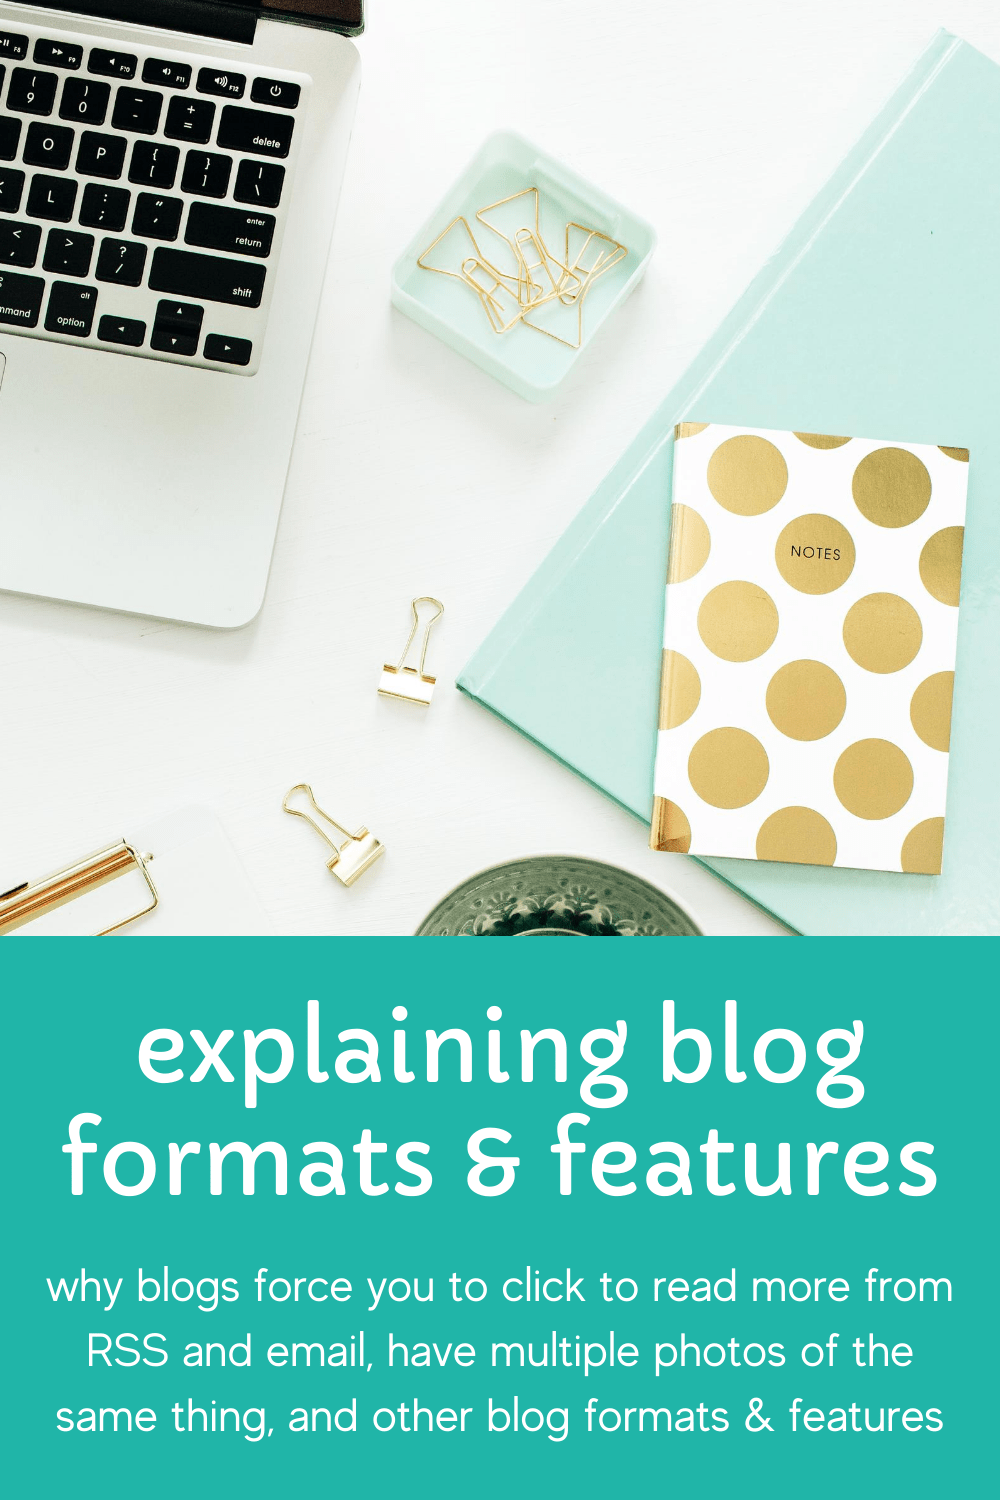 Blog Formats and Features and Their Purposes